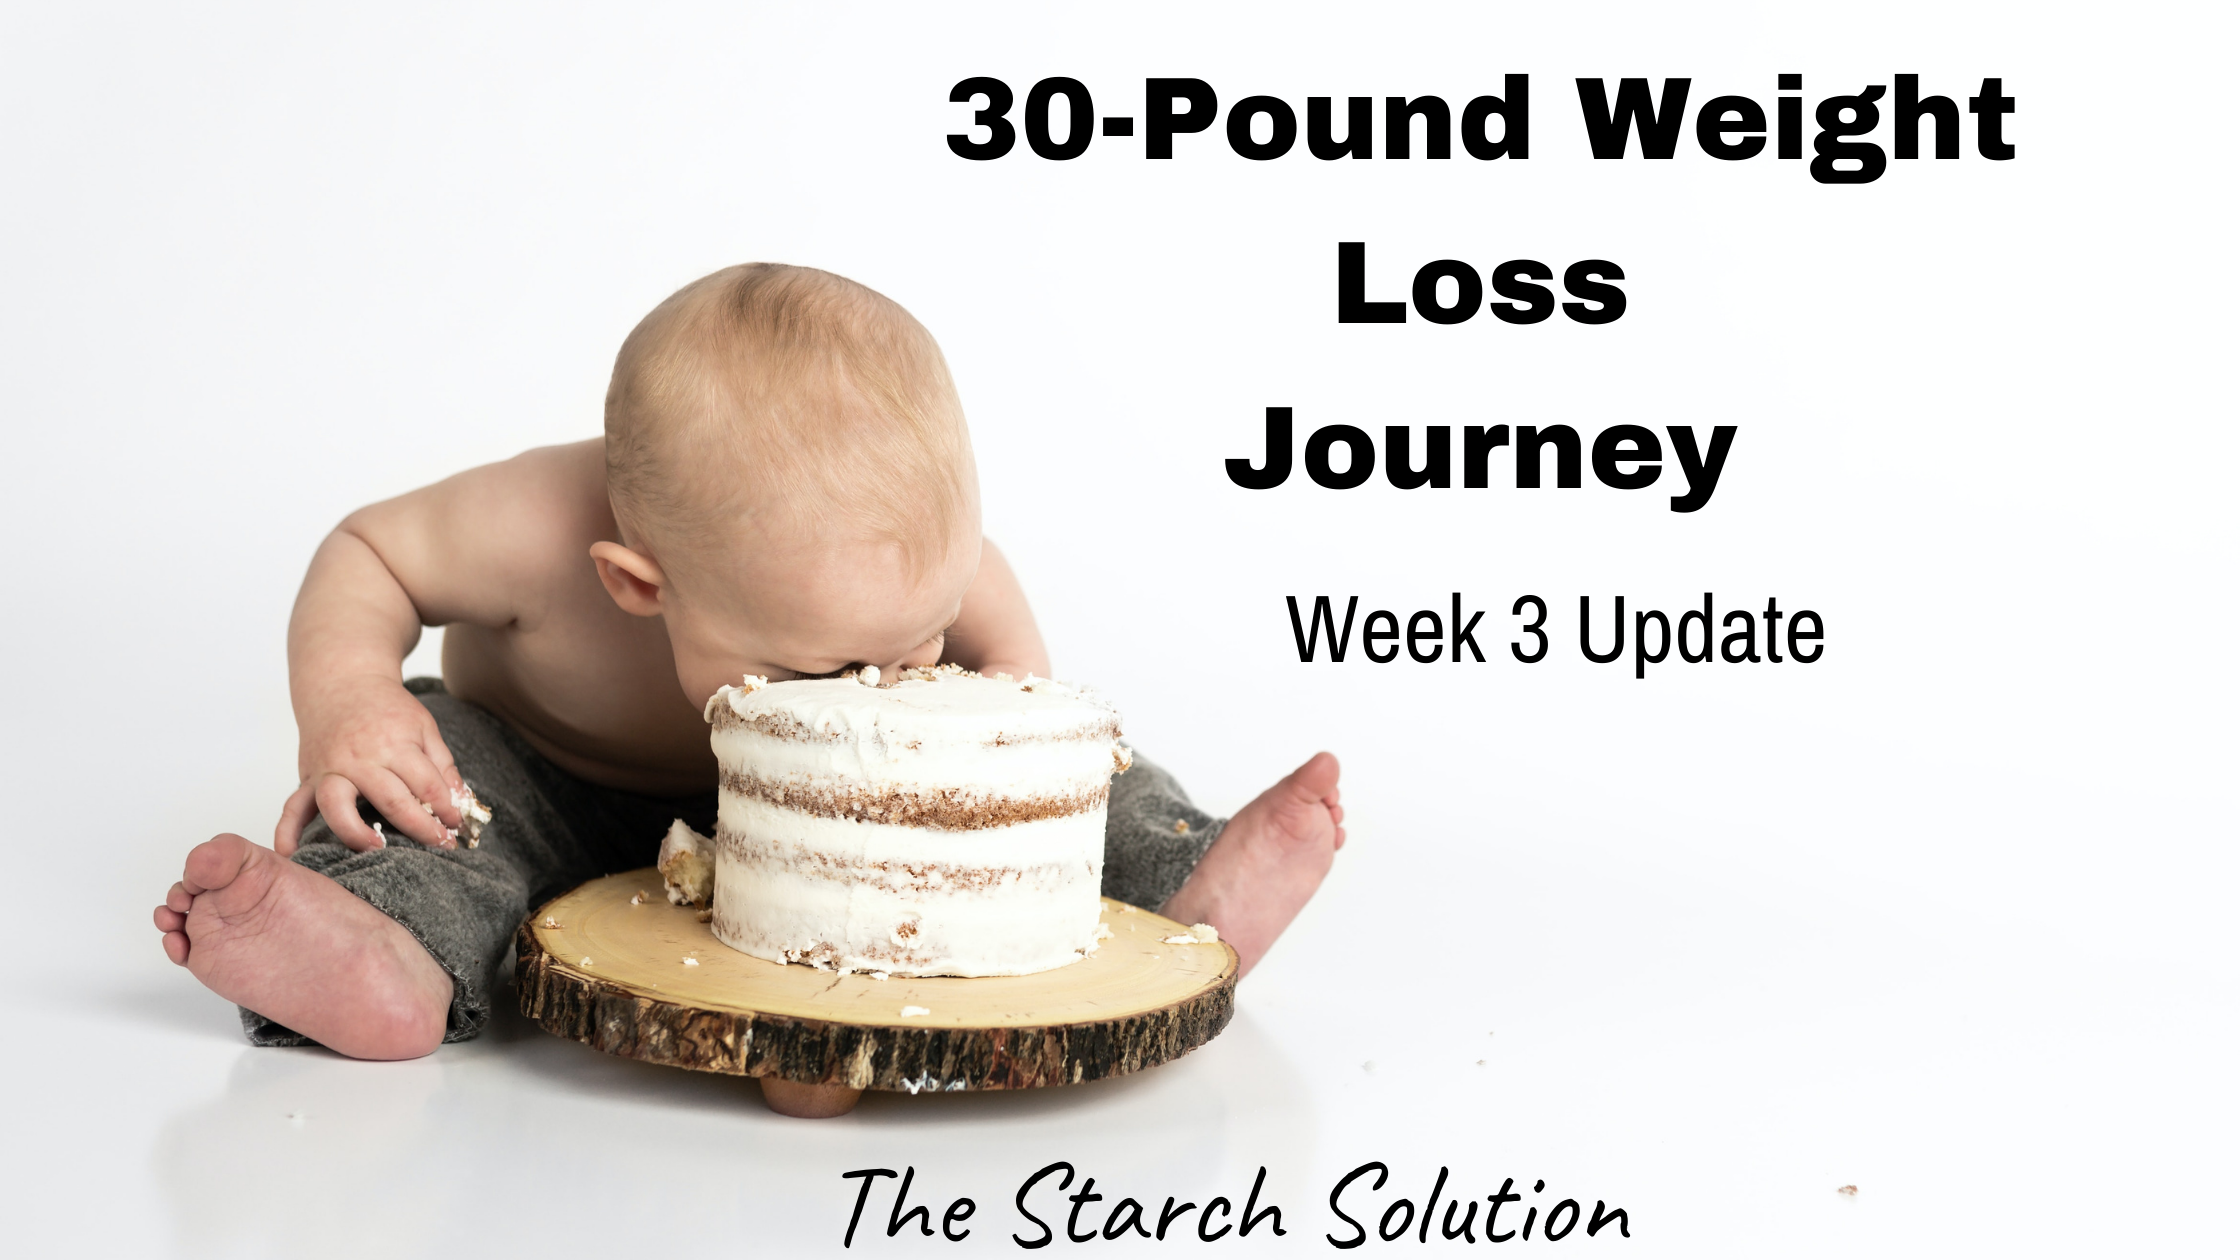 I’m On A 30-Pound Weight Loss Journey: Week 3 Update (Crazy Cravings)